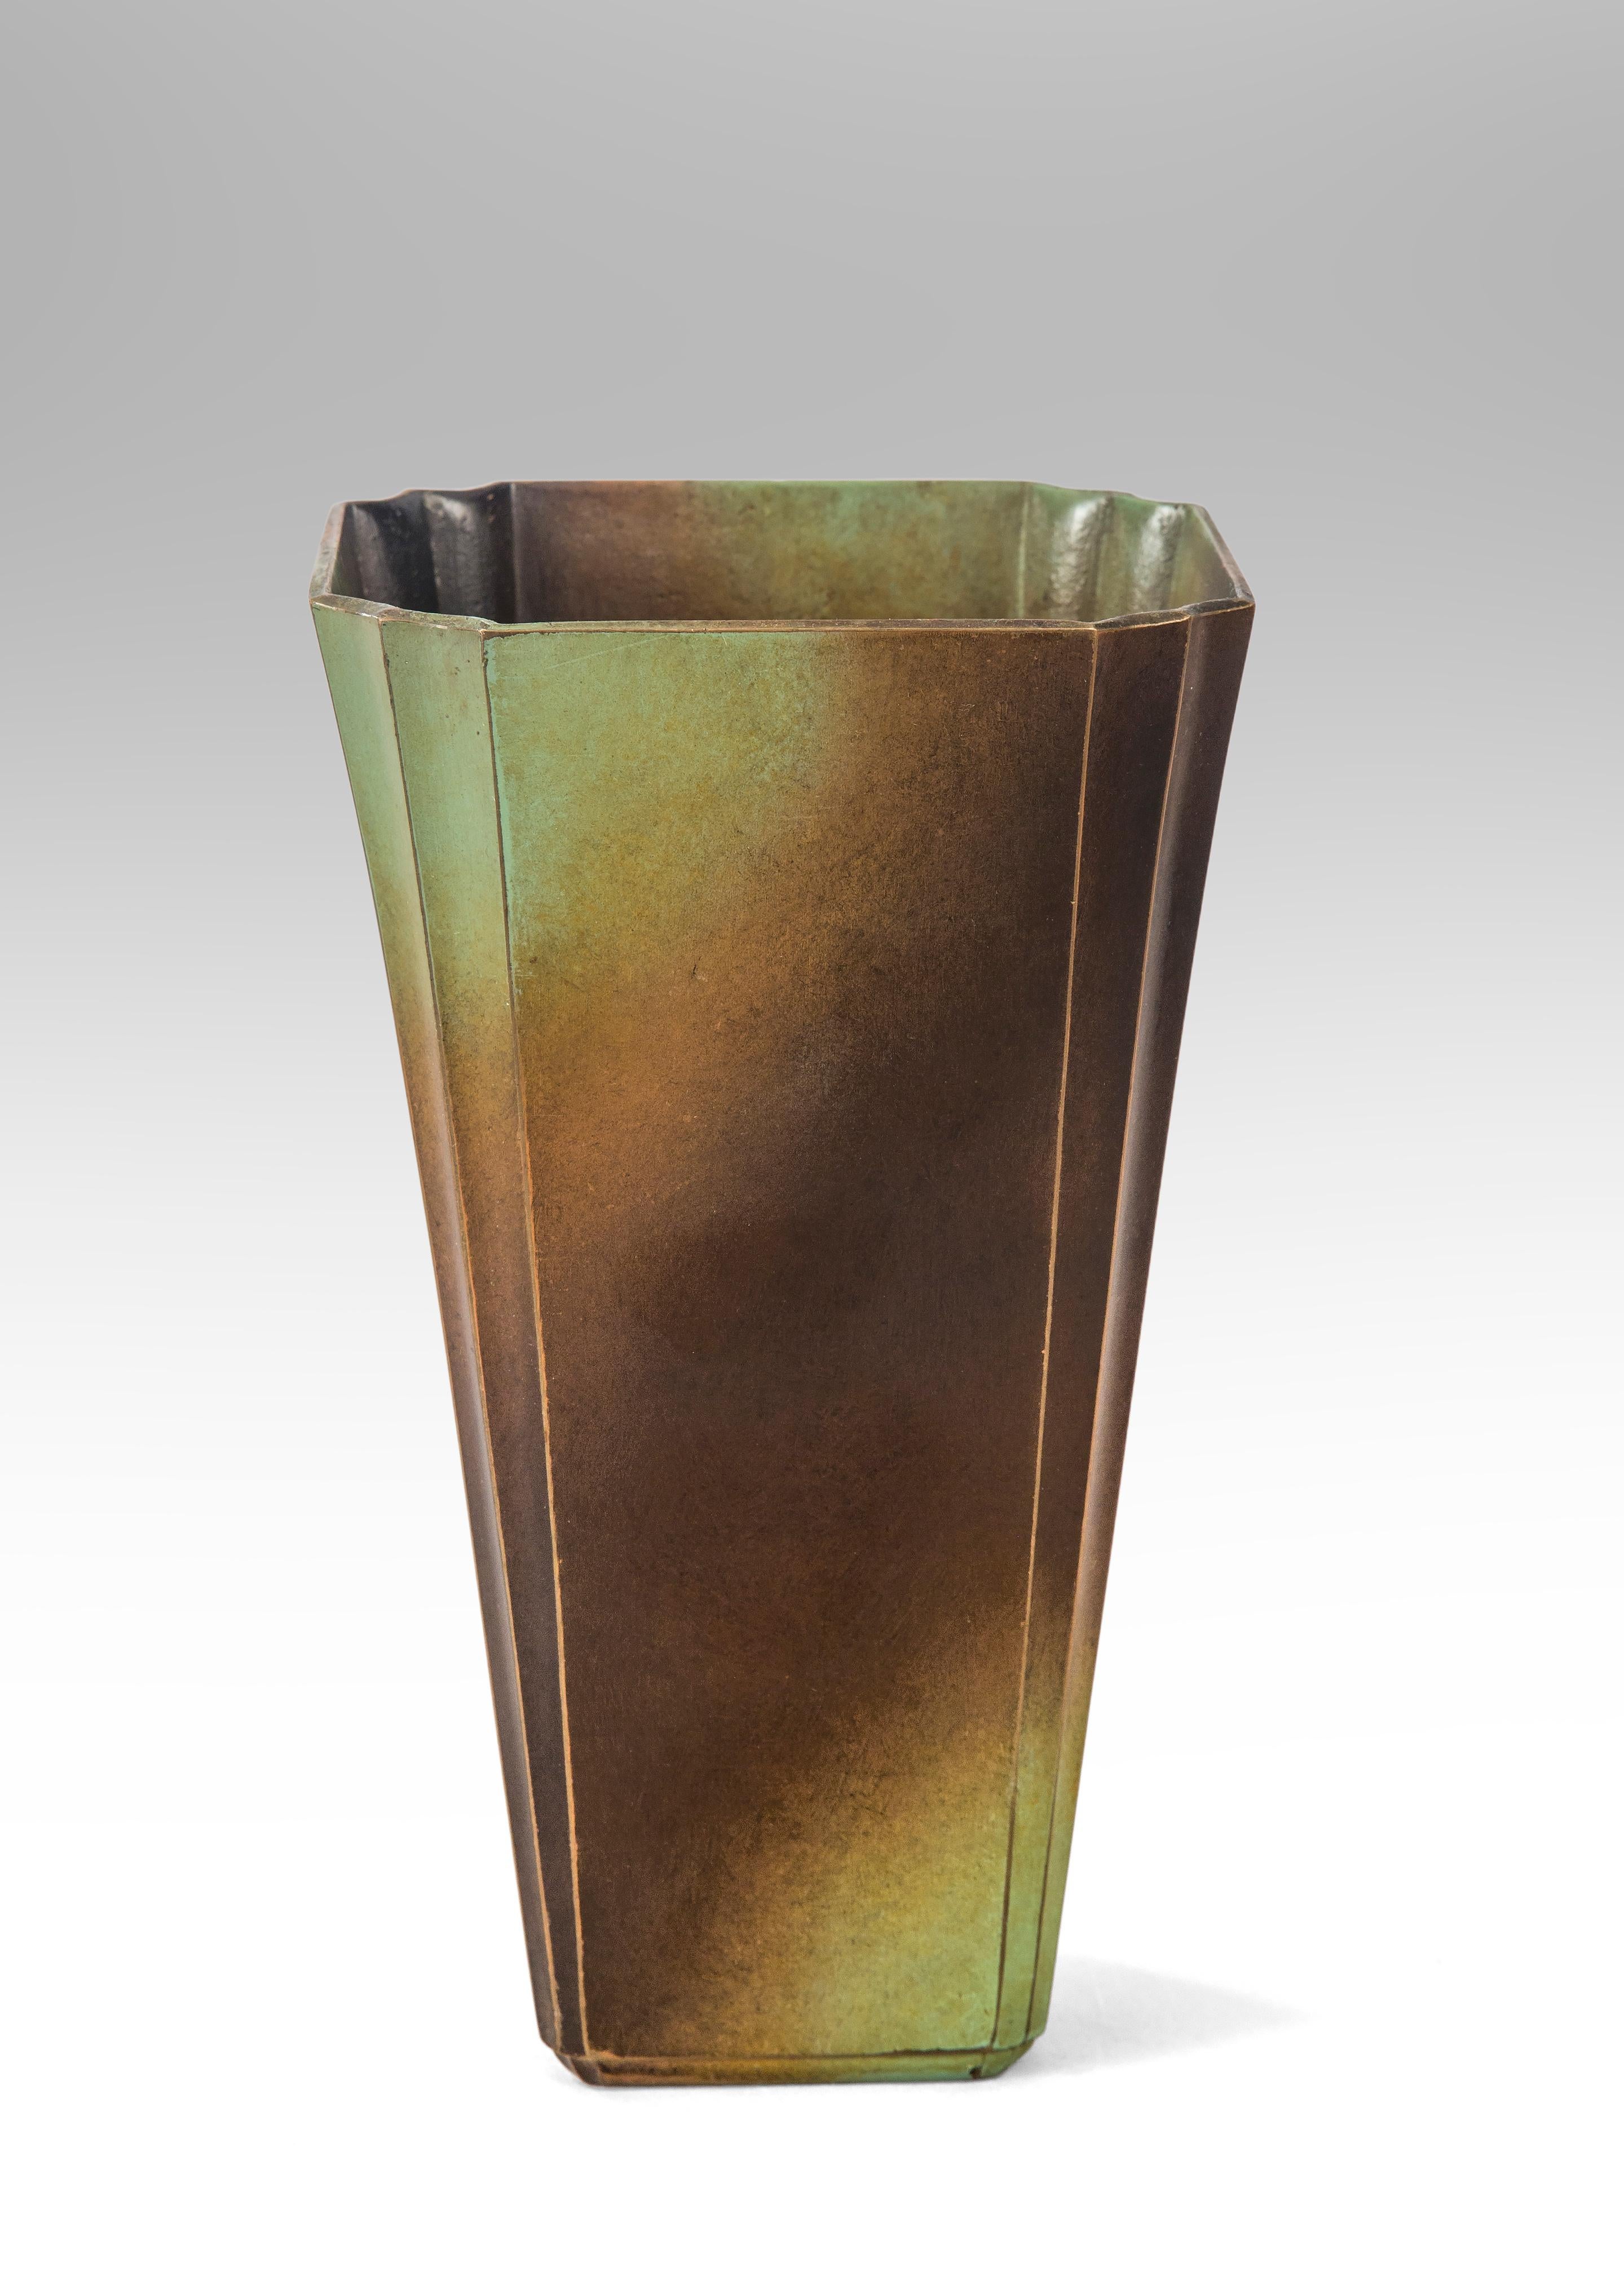 Ystad Metall 
A Swedish Art Deco patinated bronze vase
Early 20th Century
The square tapering vase with double fluted corners enhanced with a beautiful patination of green and brown. A rare and very good, heavy cast vase by this maker.
Marked: